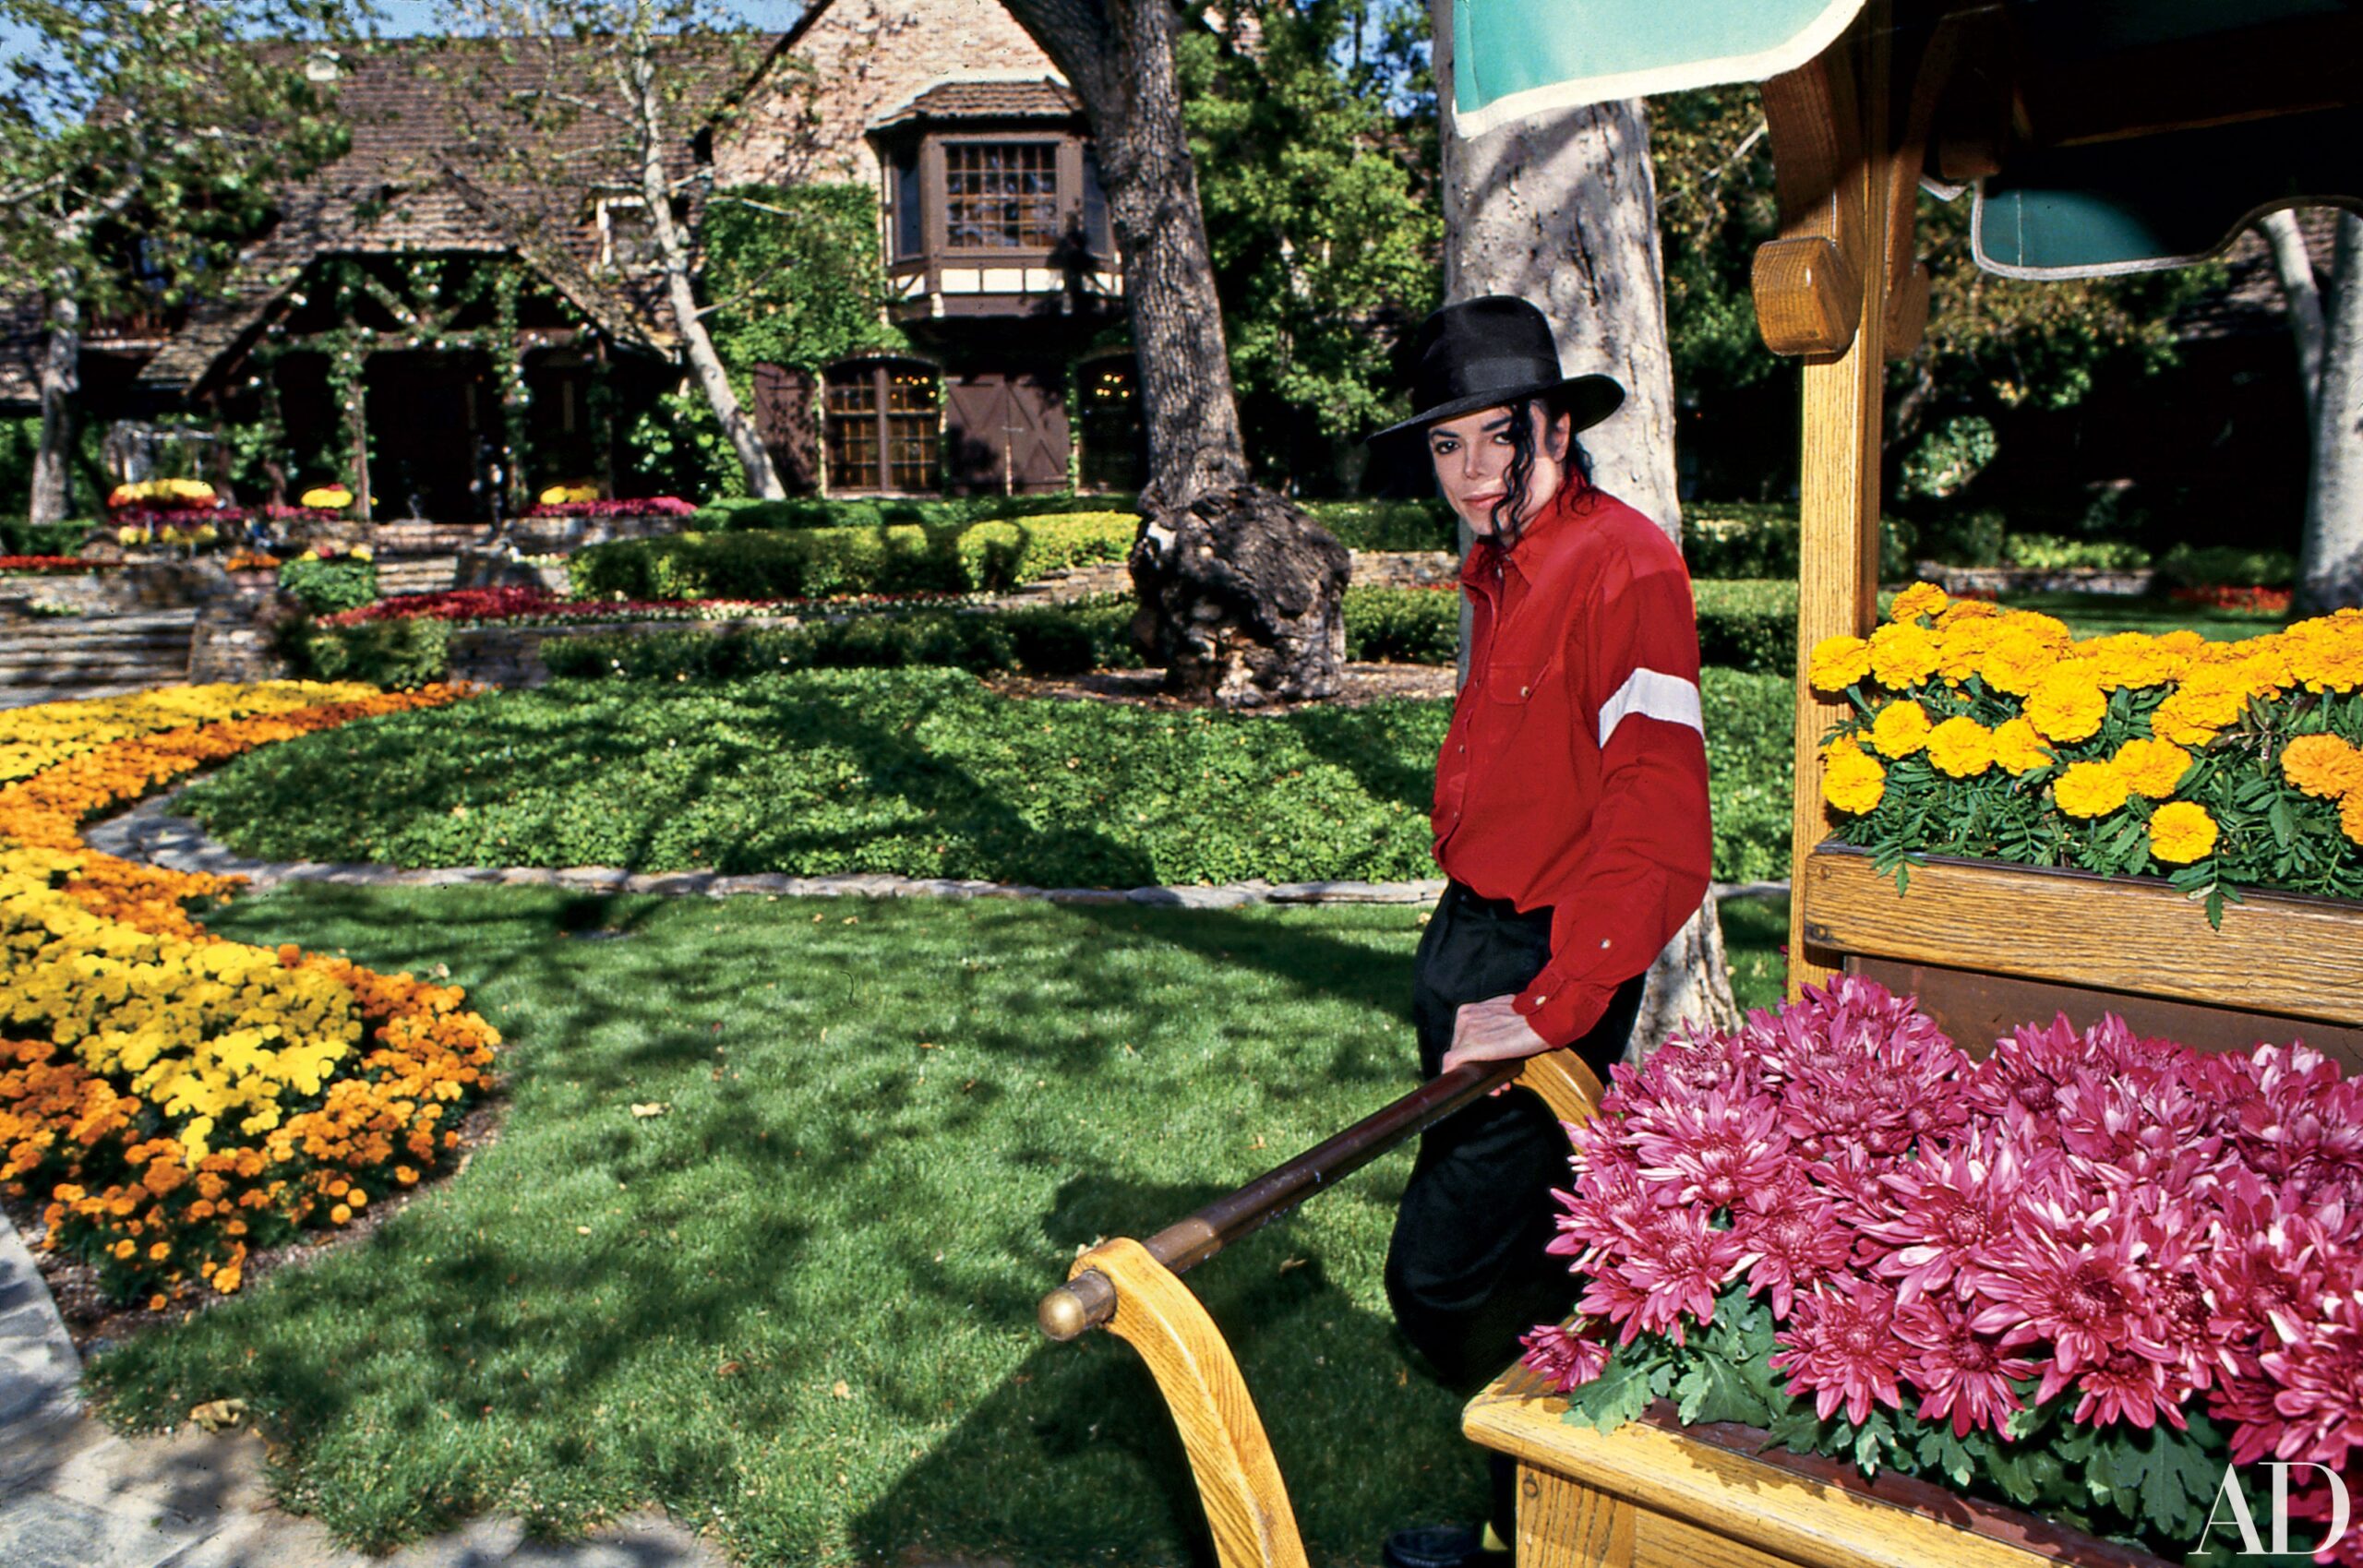 Michael Jackson's Neverland Ranch Sold for $22M